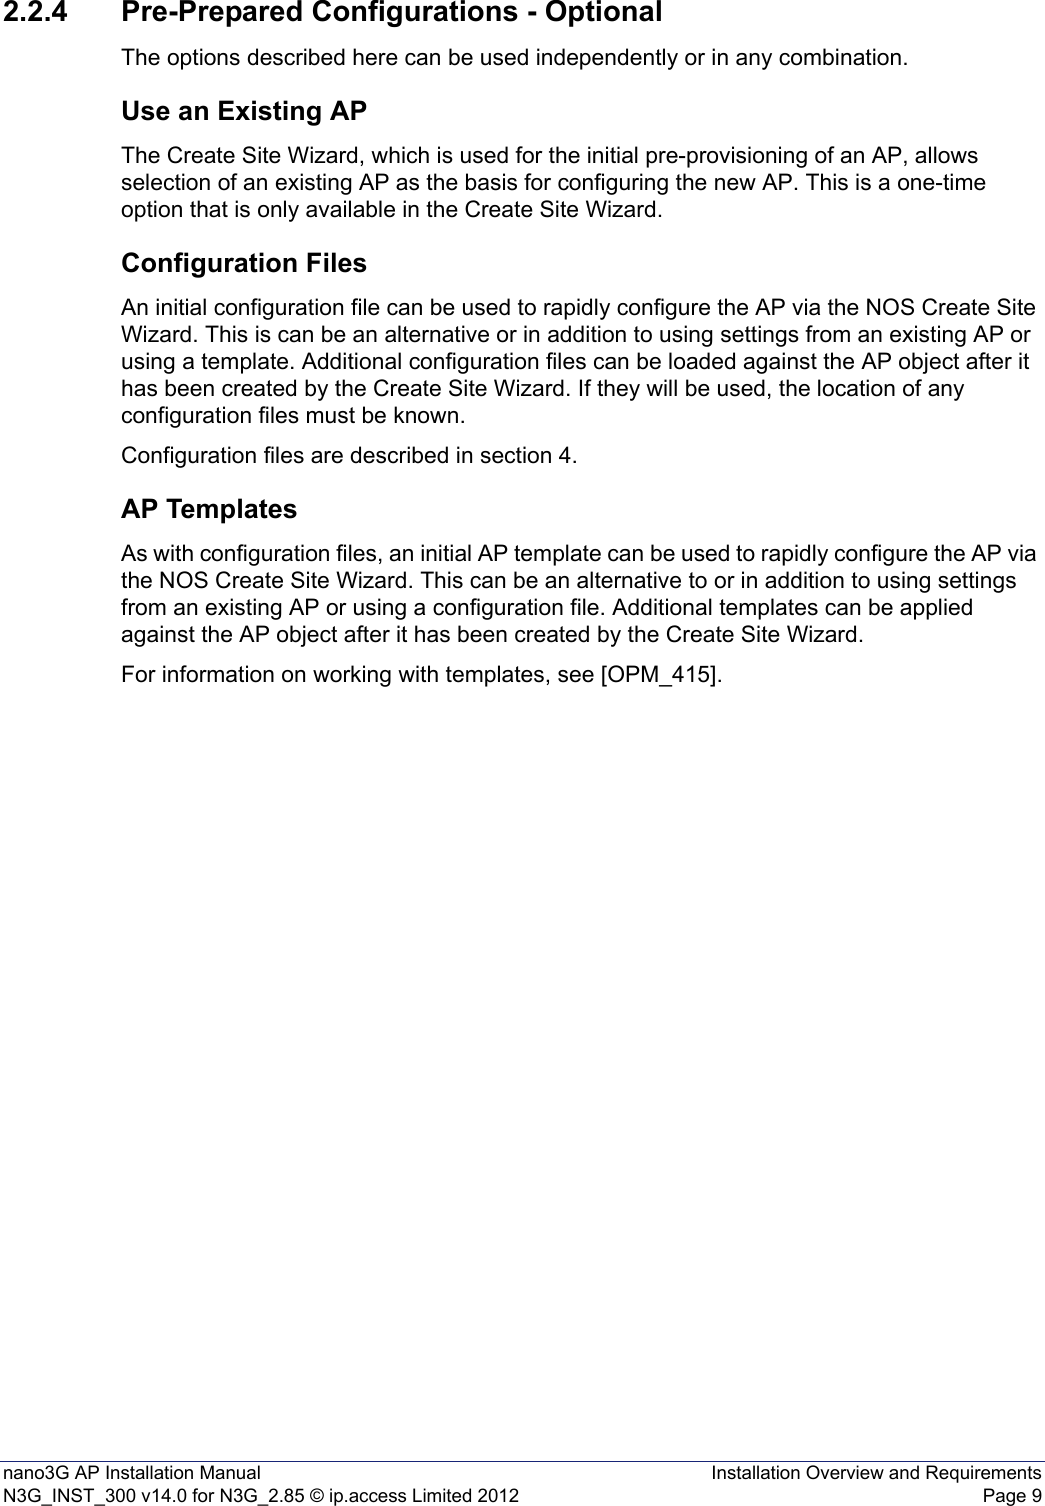 nano3G AP Installation Manual Installation Overview and RequirementsN3G_INST_300 v14.0 for N3G_2.85 © ip.access Limited 2012 Page 92.2.4 Pre-Prepared Configurations - OptionalThe options described here can be used independently or in any combination.Use an Existing APThe Create Site Wizard, which is used for the initial pre-provisioning of an AP, allows selection of an existing AP as the basis for configuring the new AP. This is a one-time option that is only available in the Create Site Wizard. Configuration FilesAn initial configuration file can be used to rapidly configure the AP via the NOS Create Site Wizard. This is can be an alternative or in addition to using settings from an existing AP or using a template. Additional configuration files can be loaded against the AP object after it has been created by the Create Site Wizard. If they will be used, the location of any configuration files must be known. Configuration files are described in section 4.AP TemplatesAs with configuration files, an initial AP template can be used to rapidly configure the AP via the NOS Create Site Wizard. This can be an alternative to or in addition to using settings from an existing AP or using a configuration file. Additional templates can be applied against the AP object after it has been created by the Create Site Wizard. For information on working with templates, see [OPM_415].